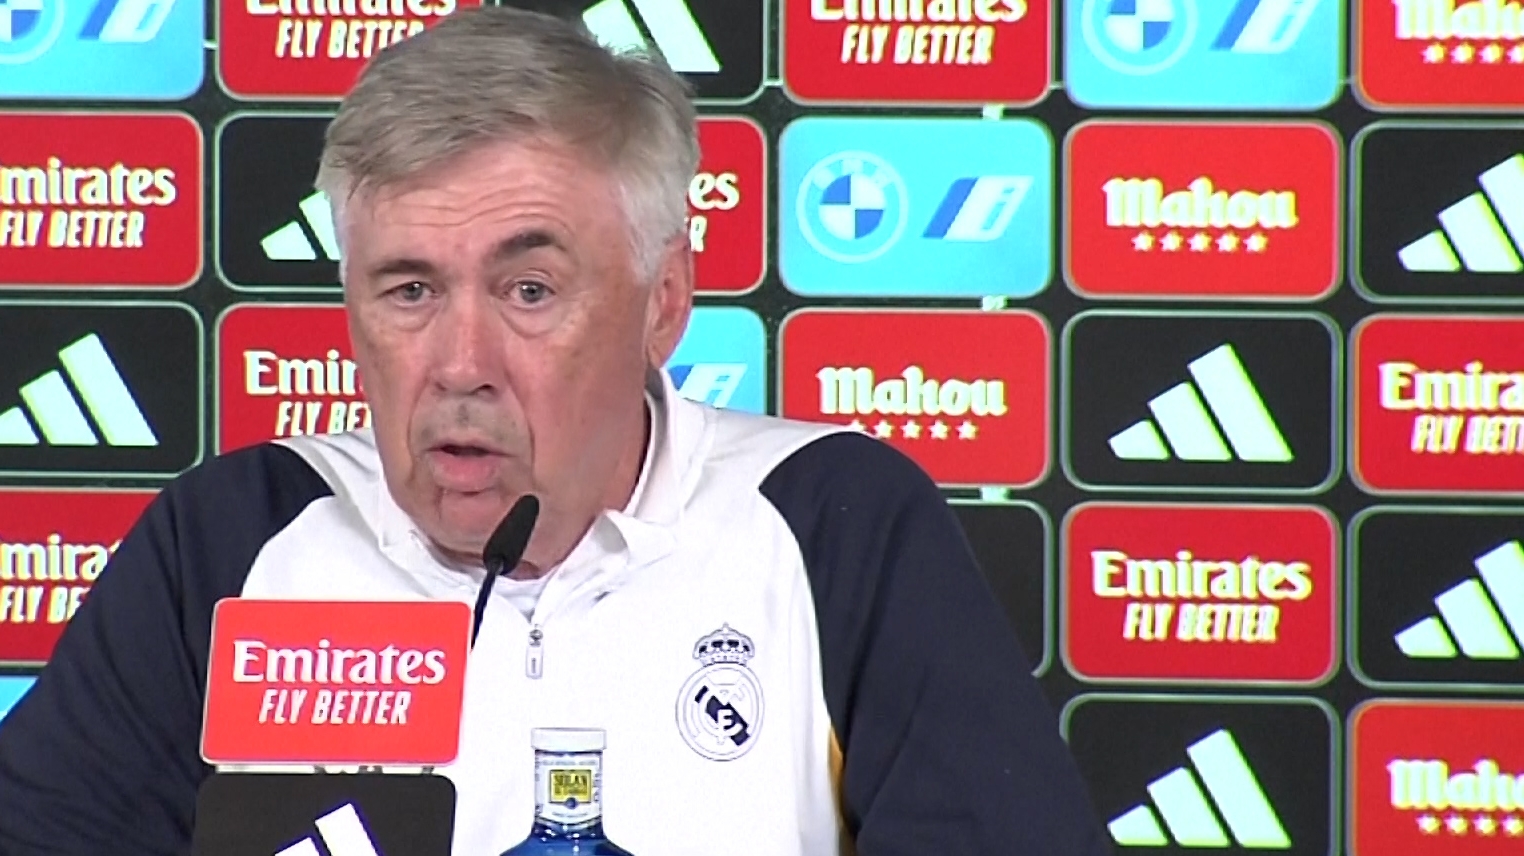 Ancelotti on Girona leading LaLiga Theyve done better than us - Stream the Video